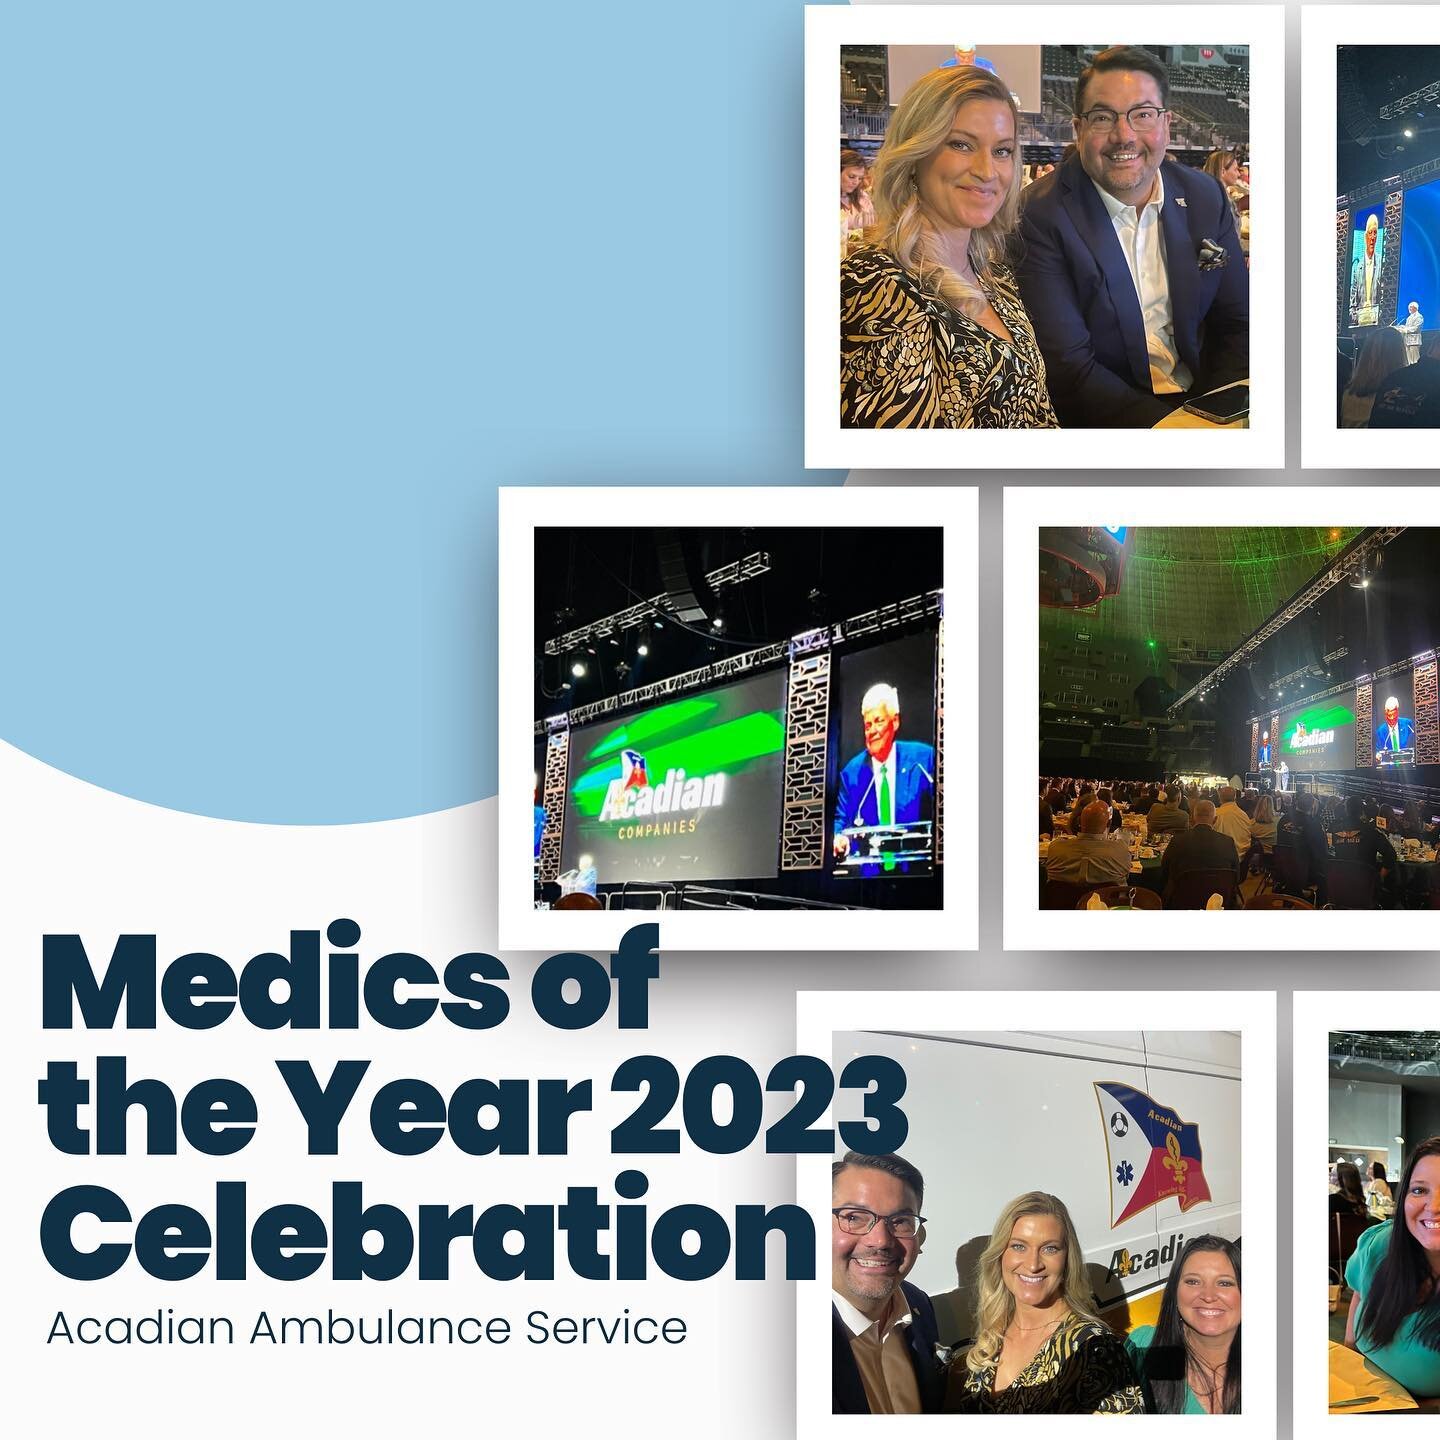 Solutions Group continues to see remarkable achievement through collaboration with partners such as Acadian Ambulance Service. 

One of our Founders and Managing Partners, Brian Choate, as well as Wendy Choate and Andrea Lormond were able to attend t